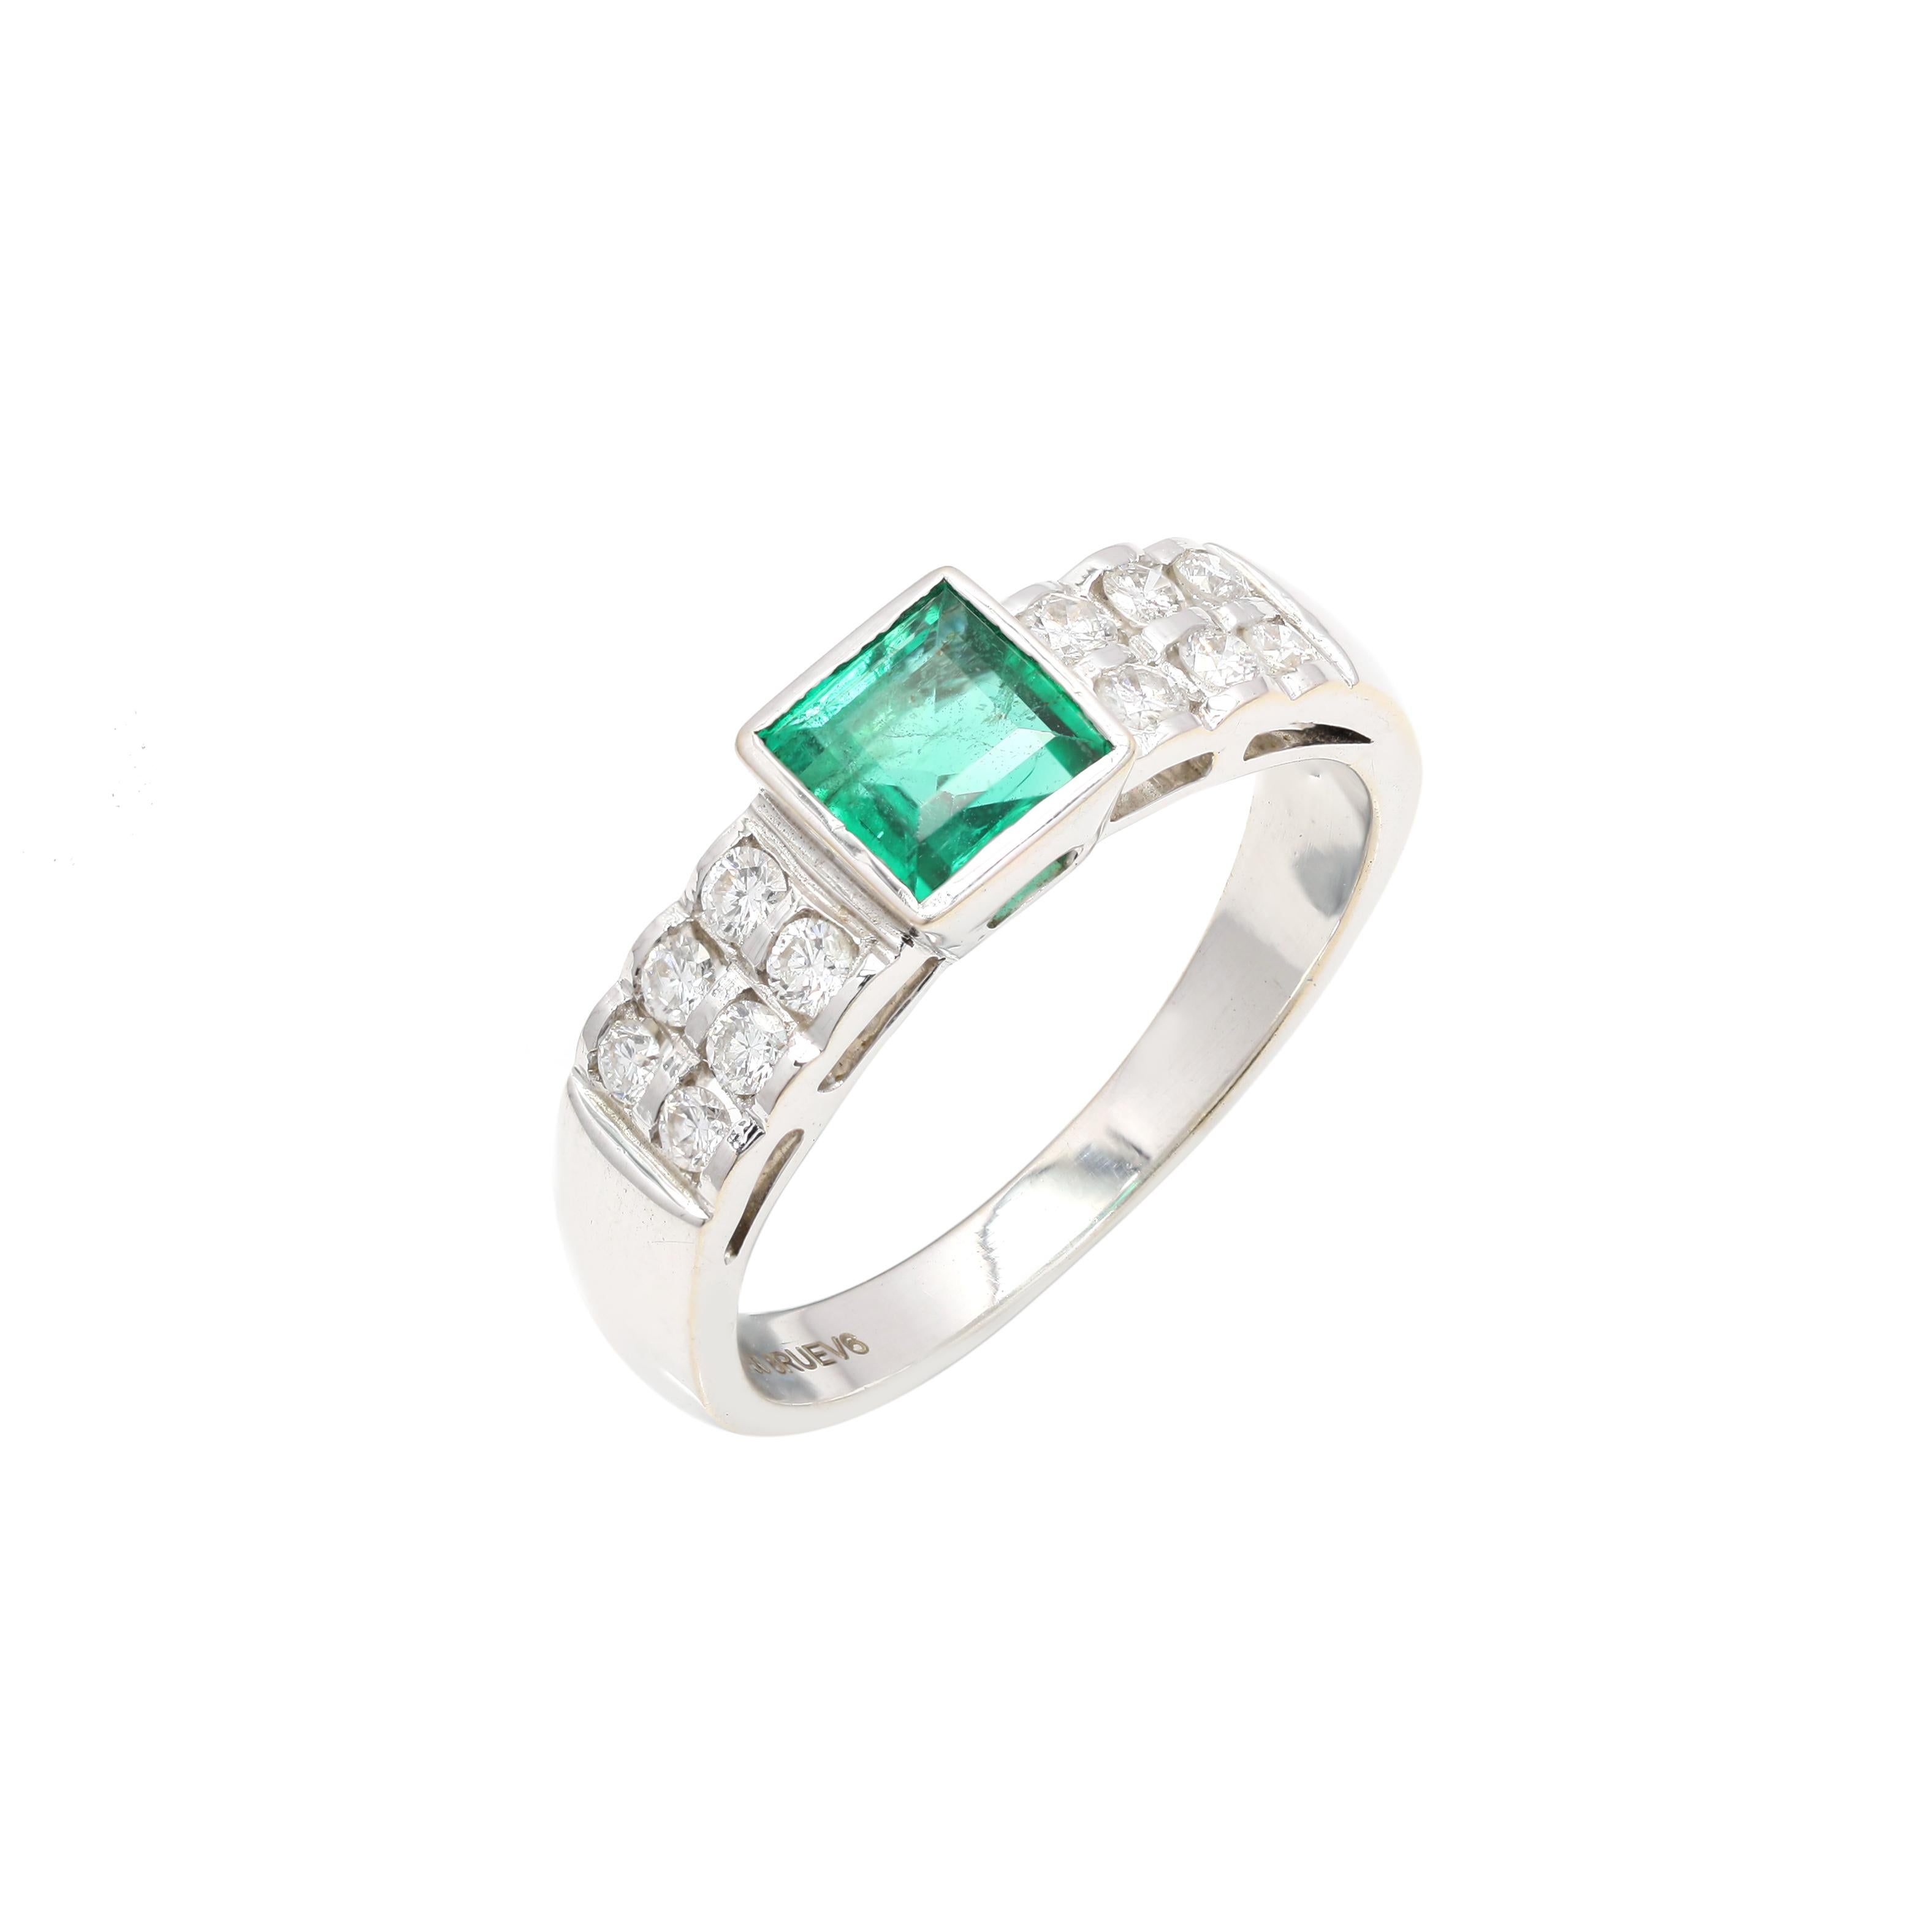 For Sale:  Unisex Diamond and Emerald Wedding Band Ring in 18k White Gold for Men 4